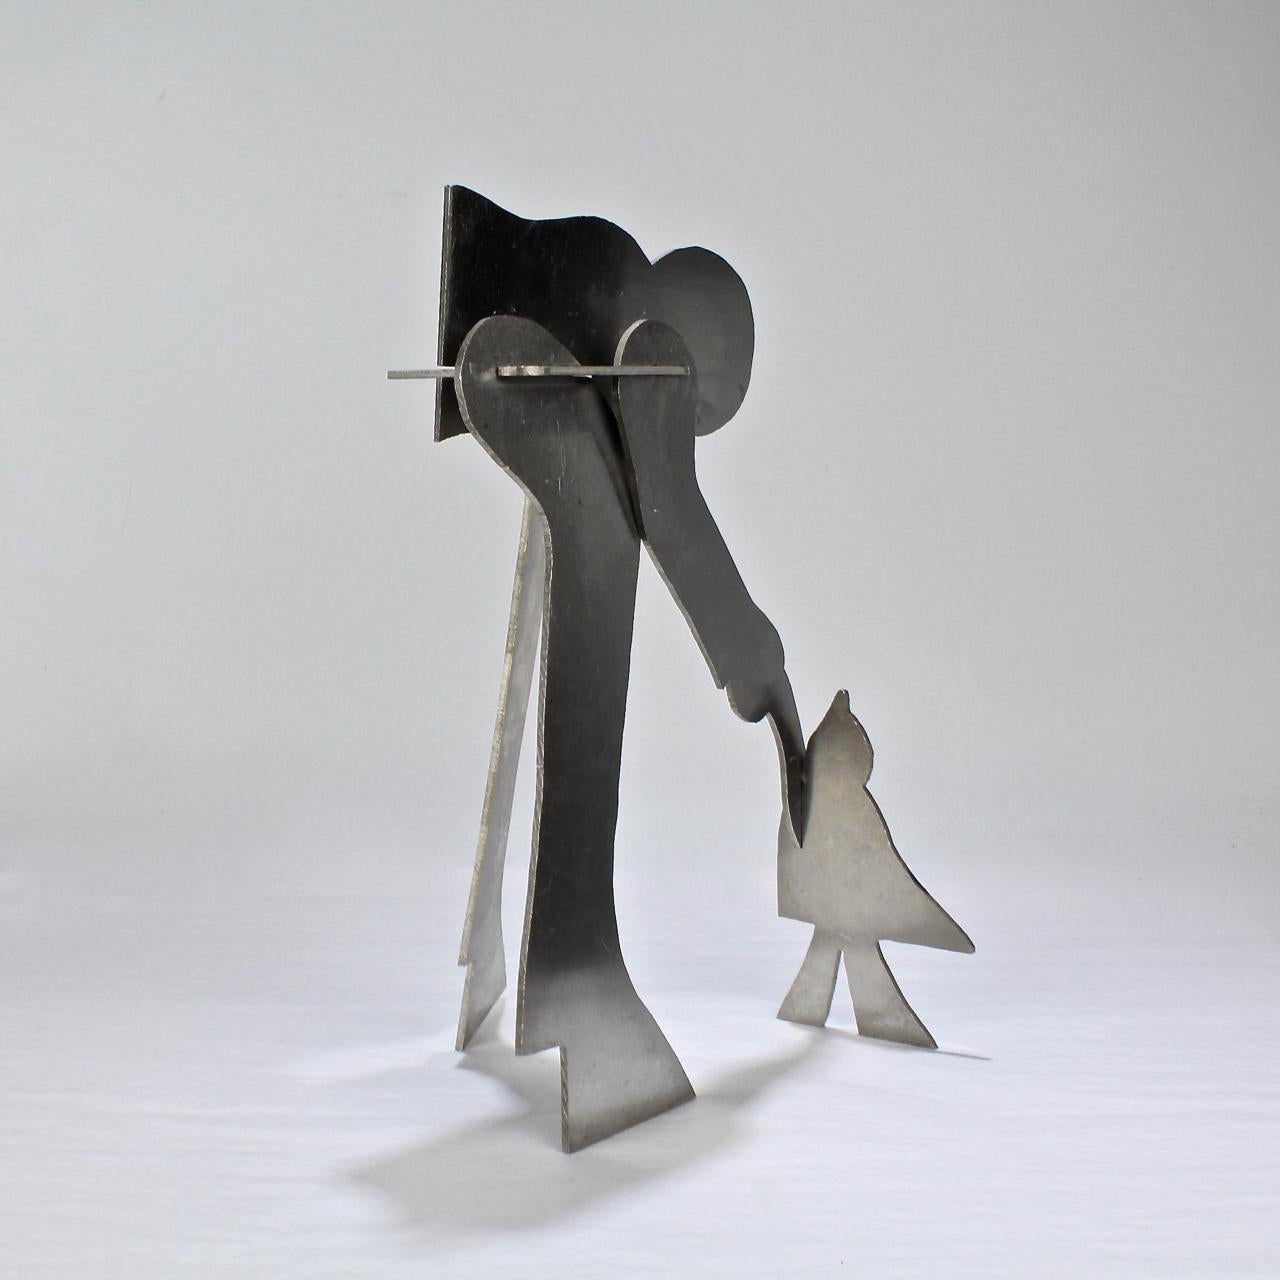 A Mid-Century Modern aluminum sculpture of a man and a bird (or perhaps a child?).

William D. King (1925-2015)

This interlocking aluminum sculpture was one of a series, which were sold principally in museum gift shops in the 1960s-1970s during